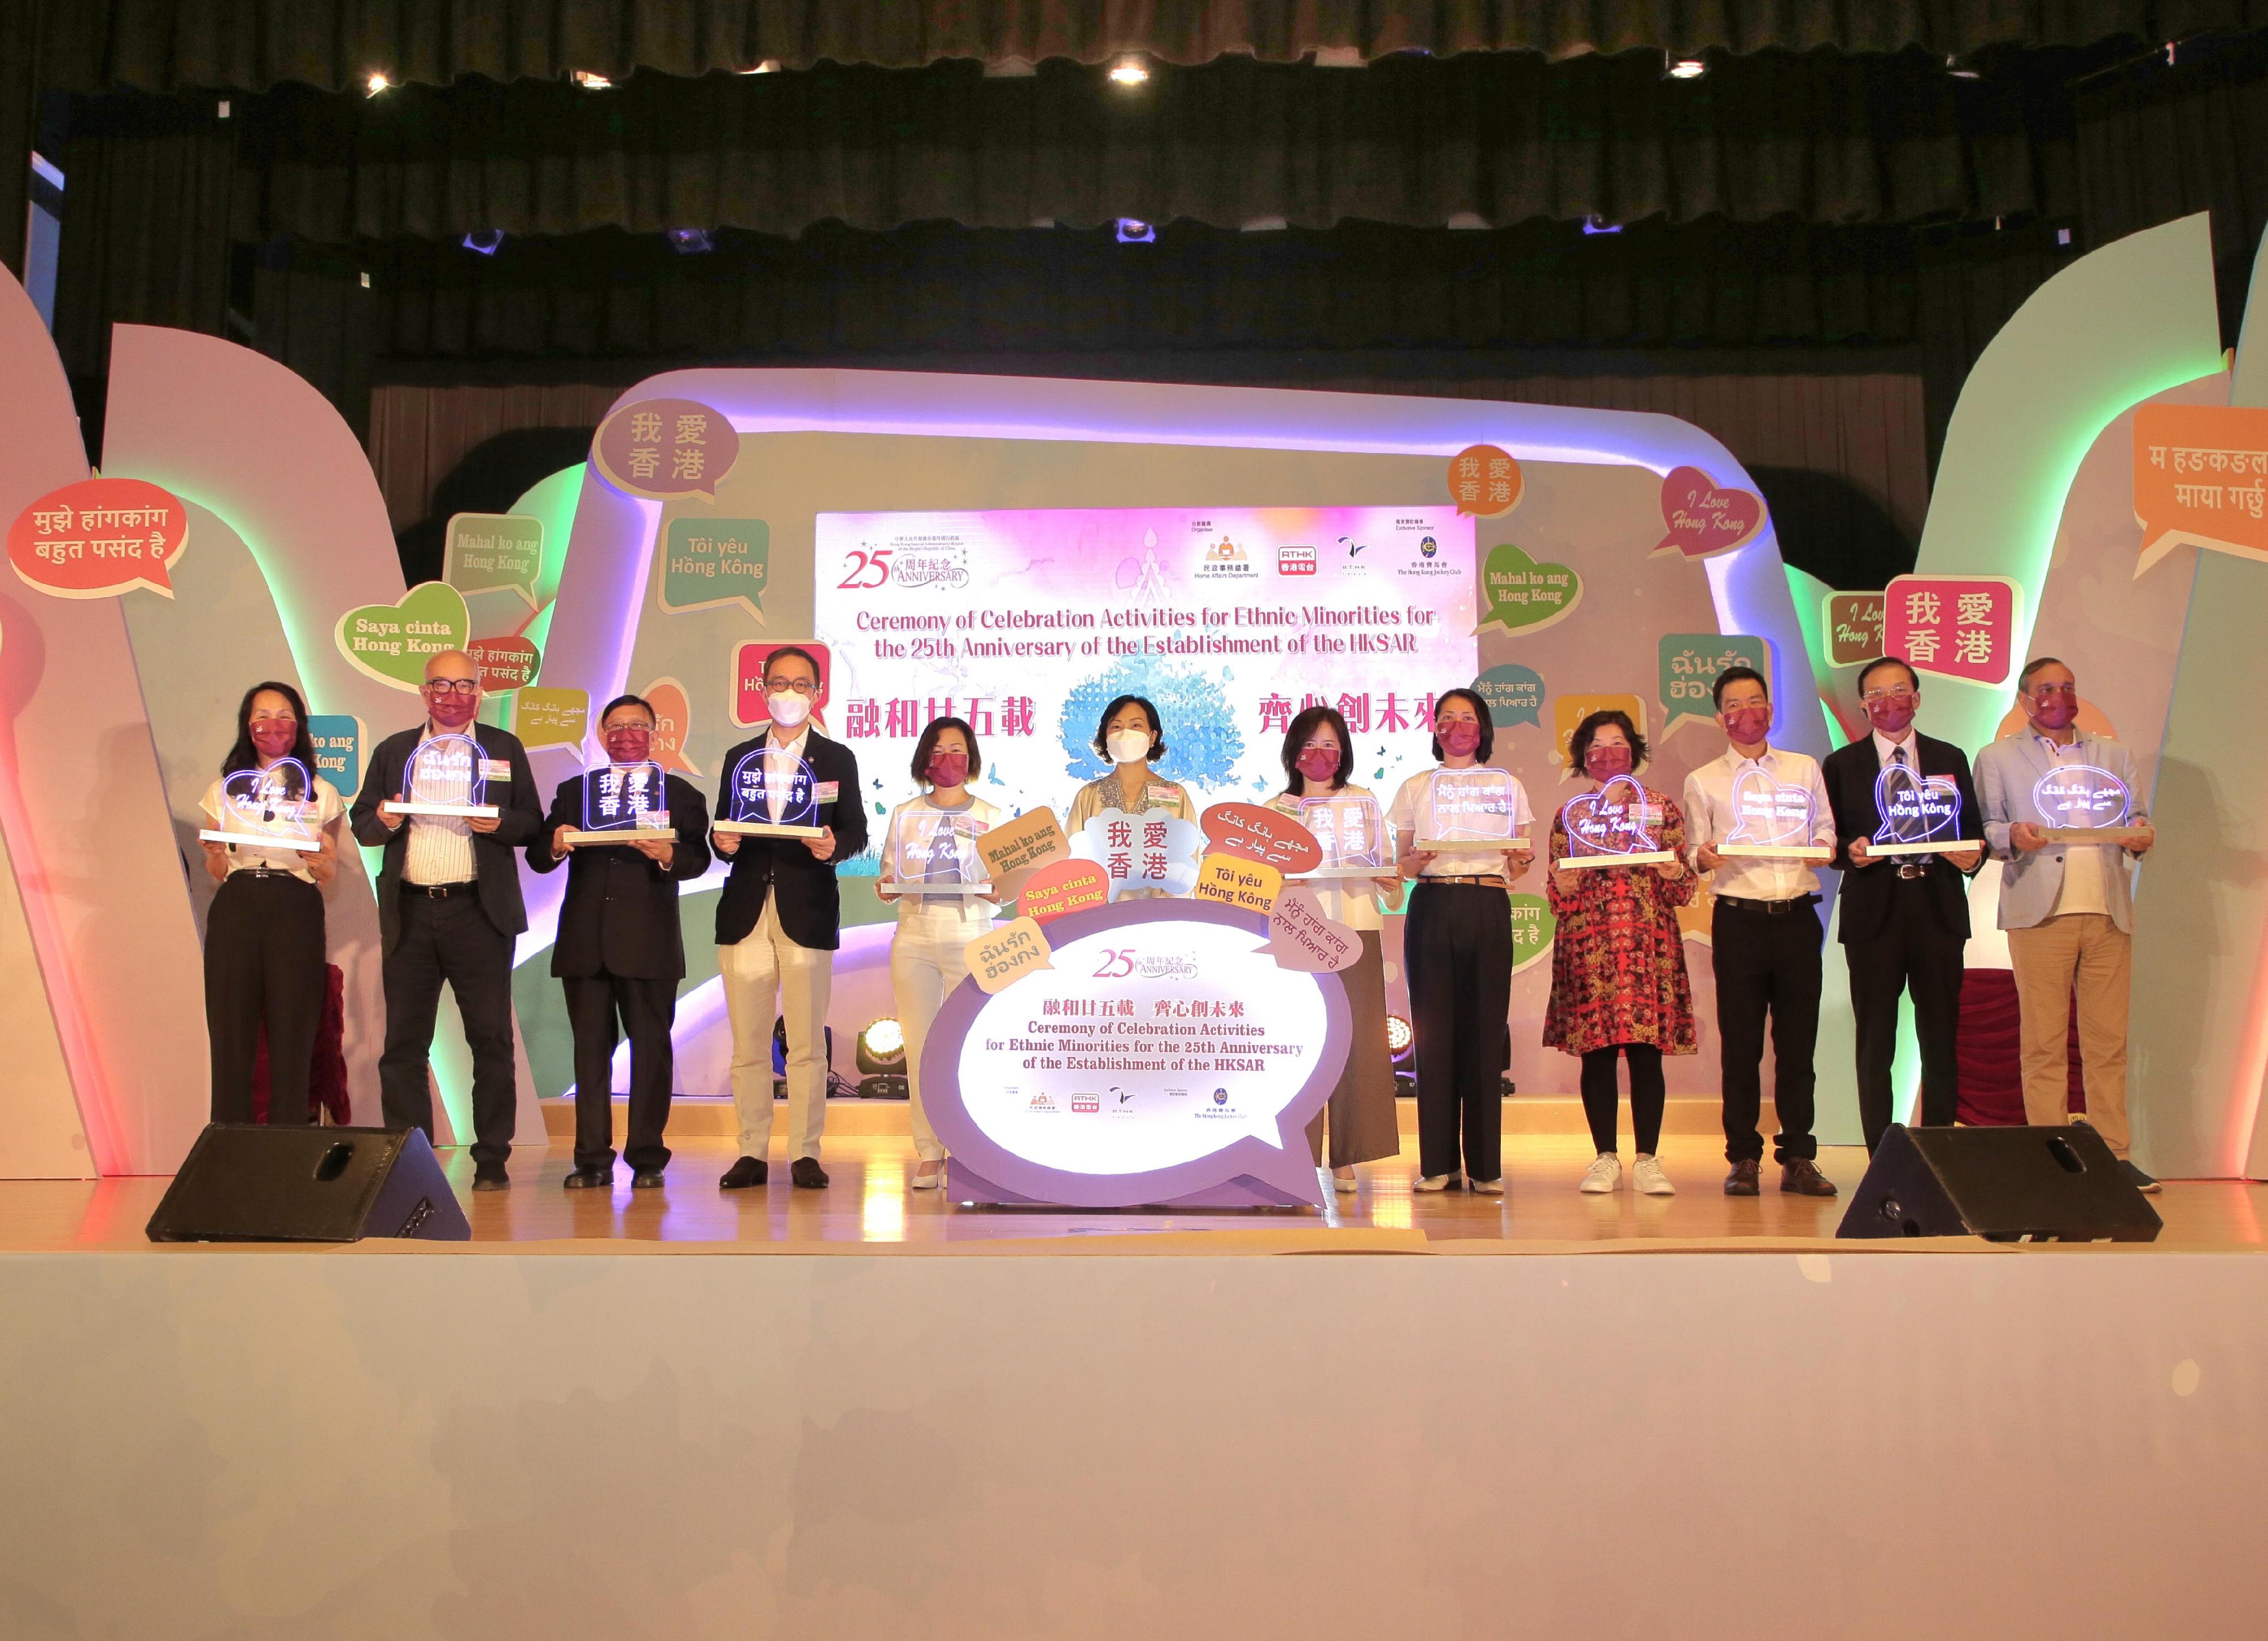 The Home Affairs Department today (August 28) held the Ceremony of Celebration Activities for Ethnic Minorities for the 25th Anniversary of the Establishment of the Hong Kong Special Administrative Region at the North Point Community Hall. Picture shows the Secretary for Home and Youth Affairs, Miss Alice Mak (sixth left); the Director of Home Affairs, Mrs Alice Cheung (fifth left); the Executive Director, Charities and Community of the Hong Kong Jockey Club, Dr Gabriel Leung (fourth left); the Acting Assistant Director of Broadcasting (Radio & Corporate Programming), Ms Amy Kwong (sixth right); and other guests officiating at the ceremony.